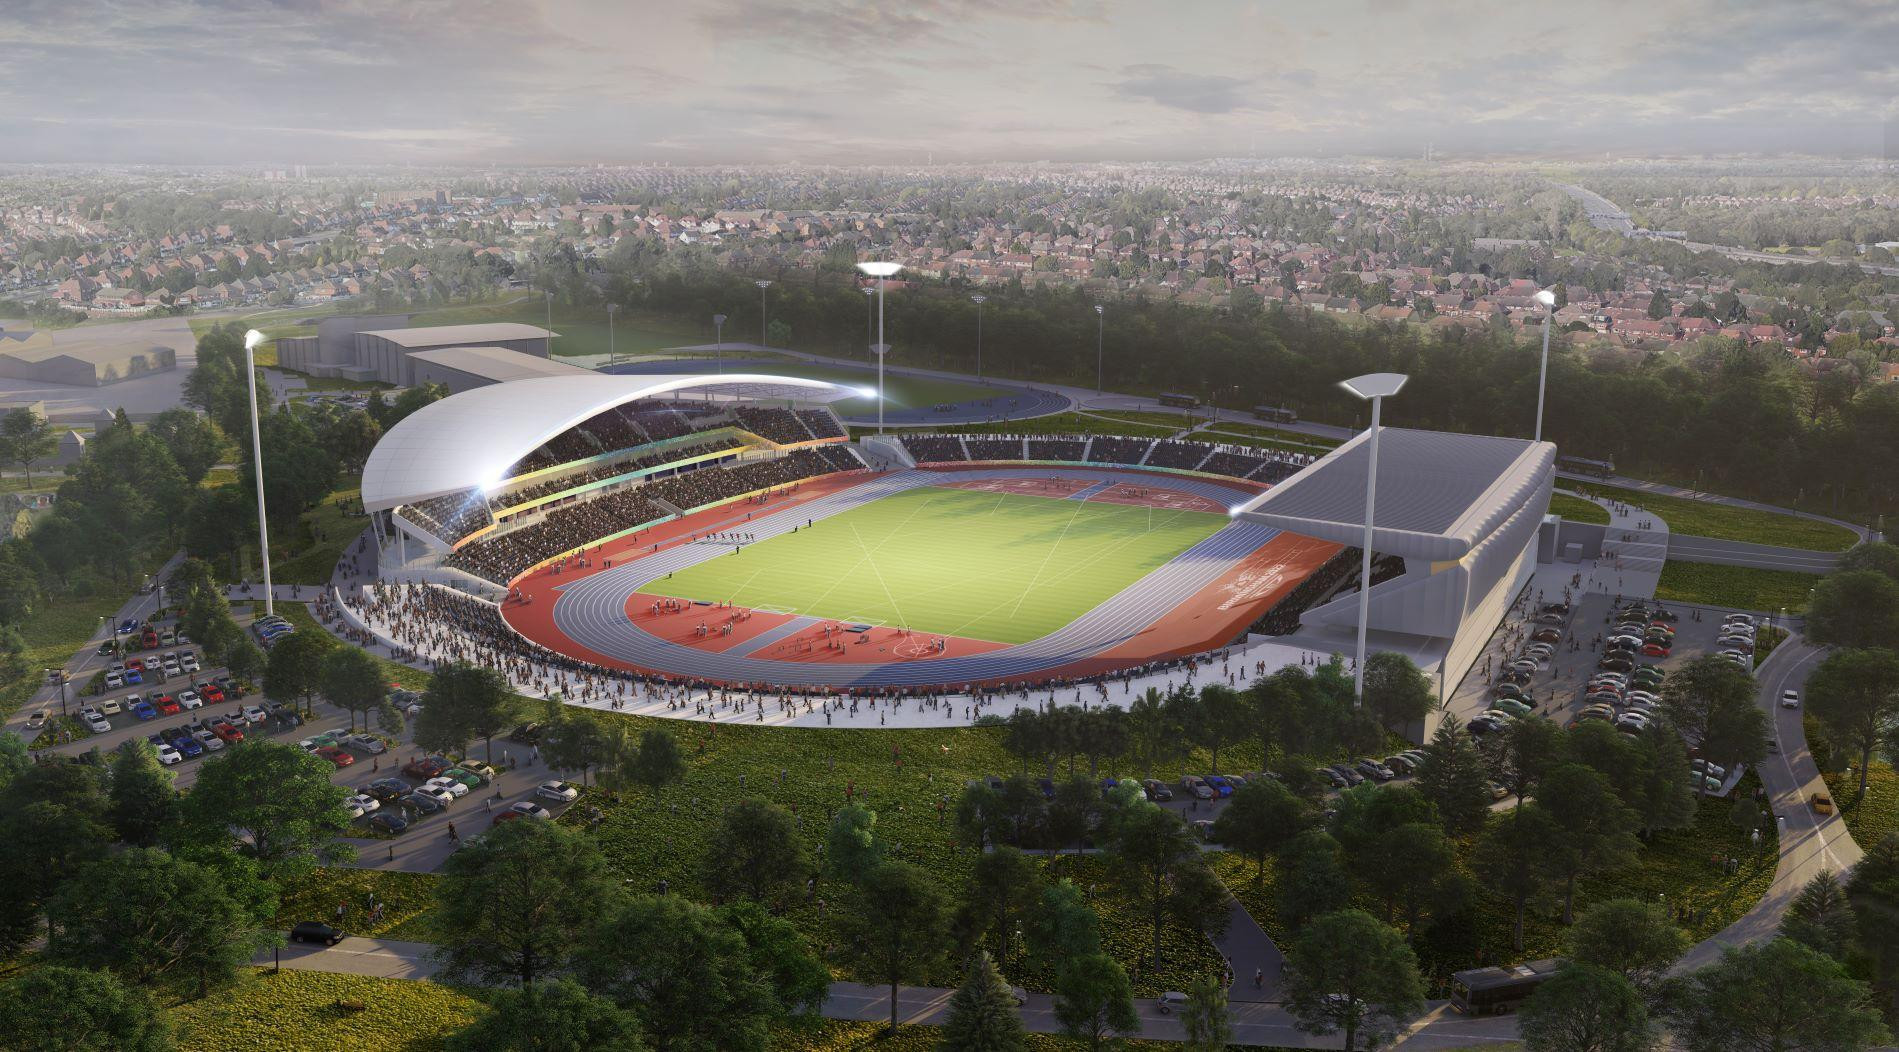 British building and civil engineering firm McLaughlin and Harvey have been given the contract to redevelop Alexander Stadium for Birmingham 2022 ©Birmingham 2022